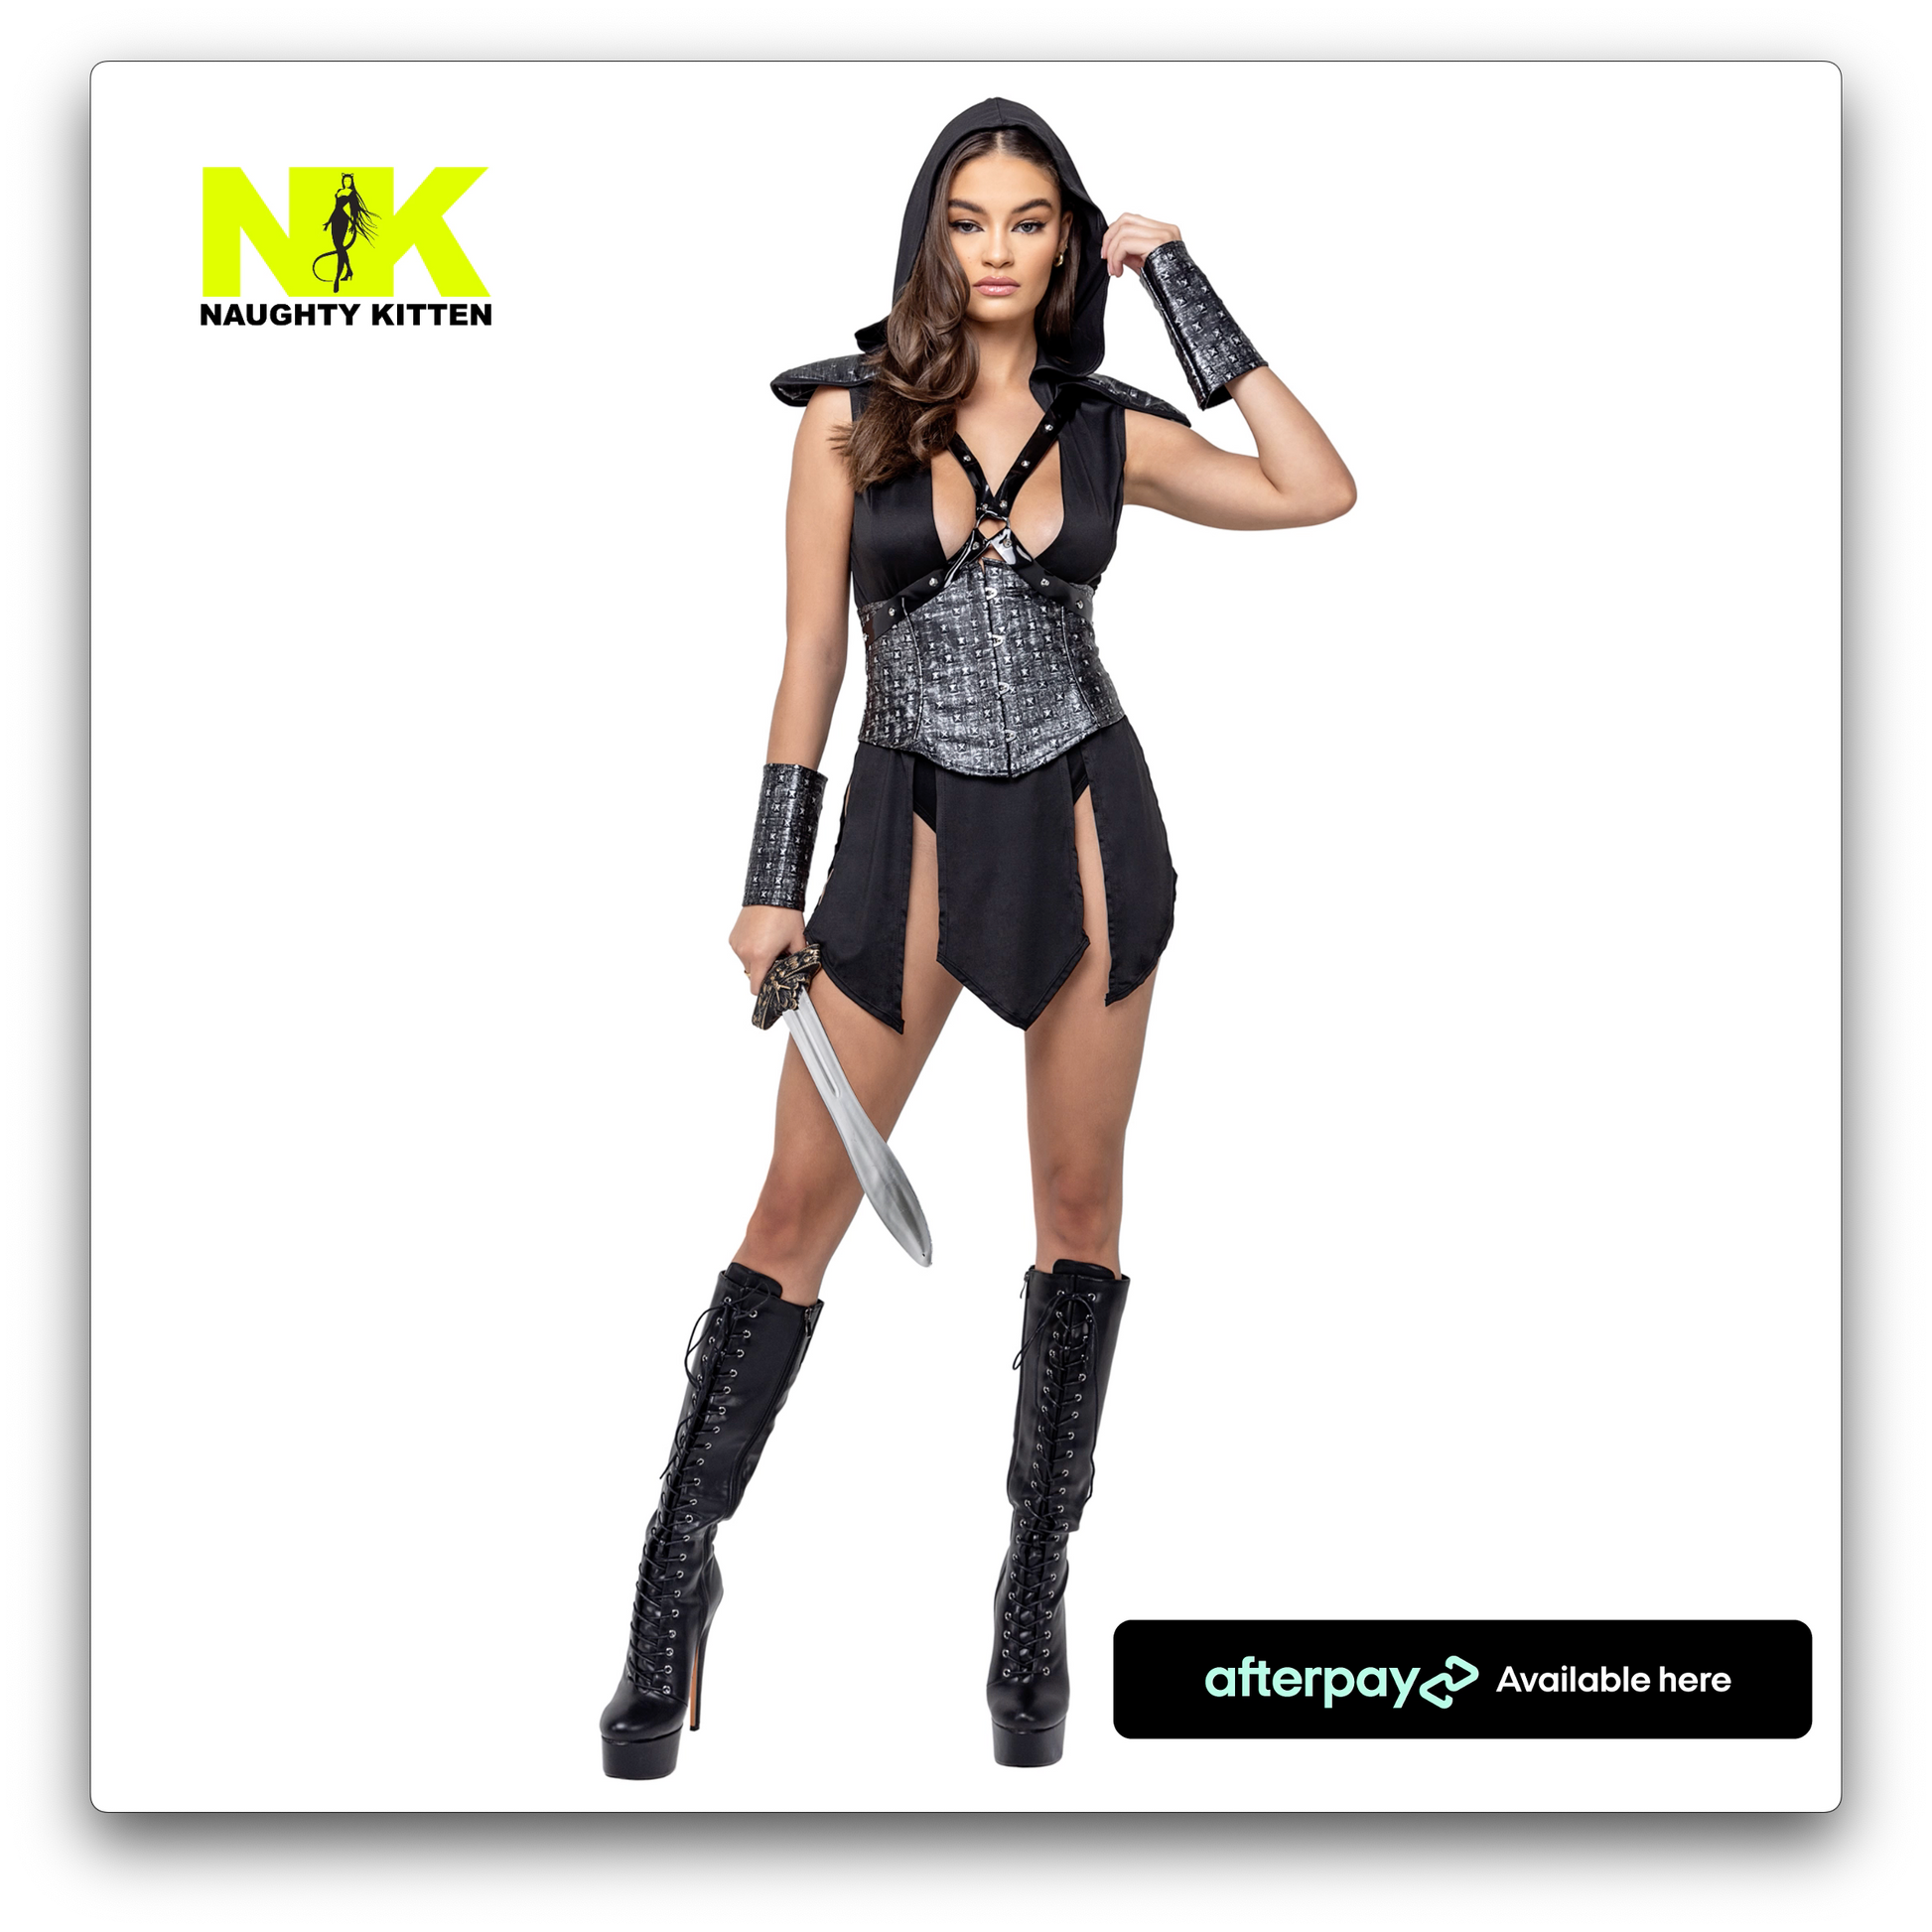 Dungeon Mistress Costume Front View - Naughty Kitten Clothing Halloween Costume